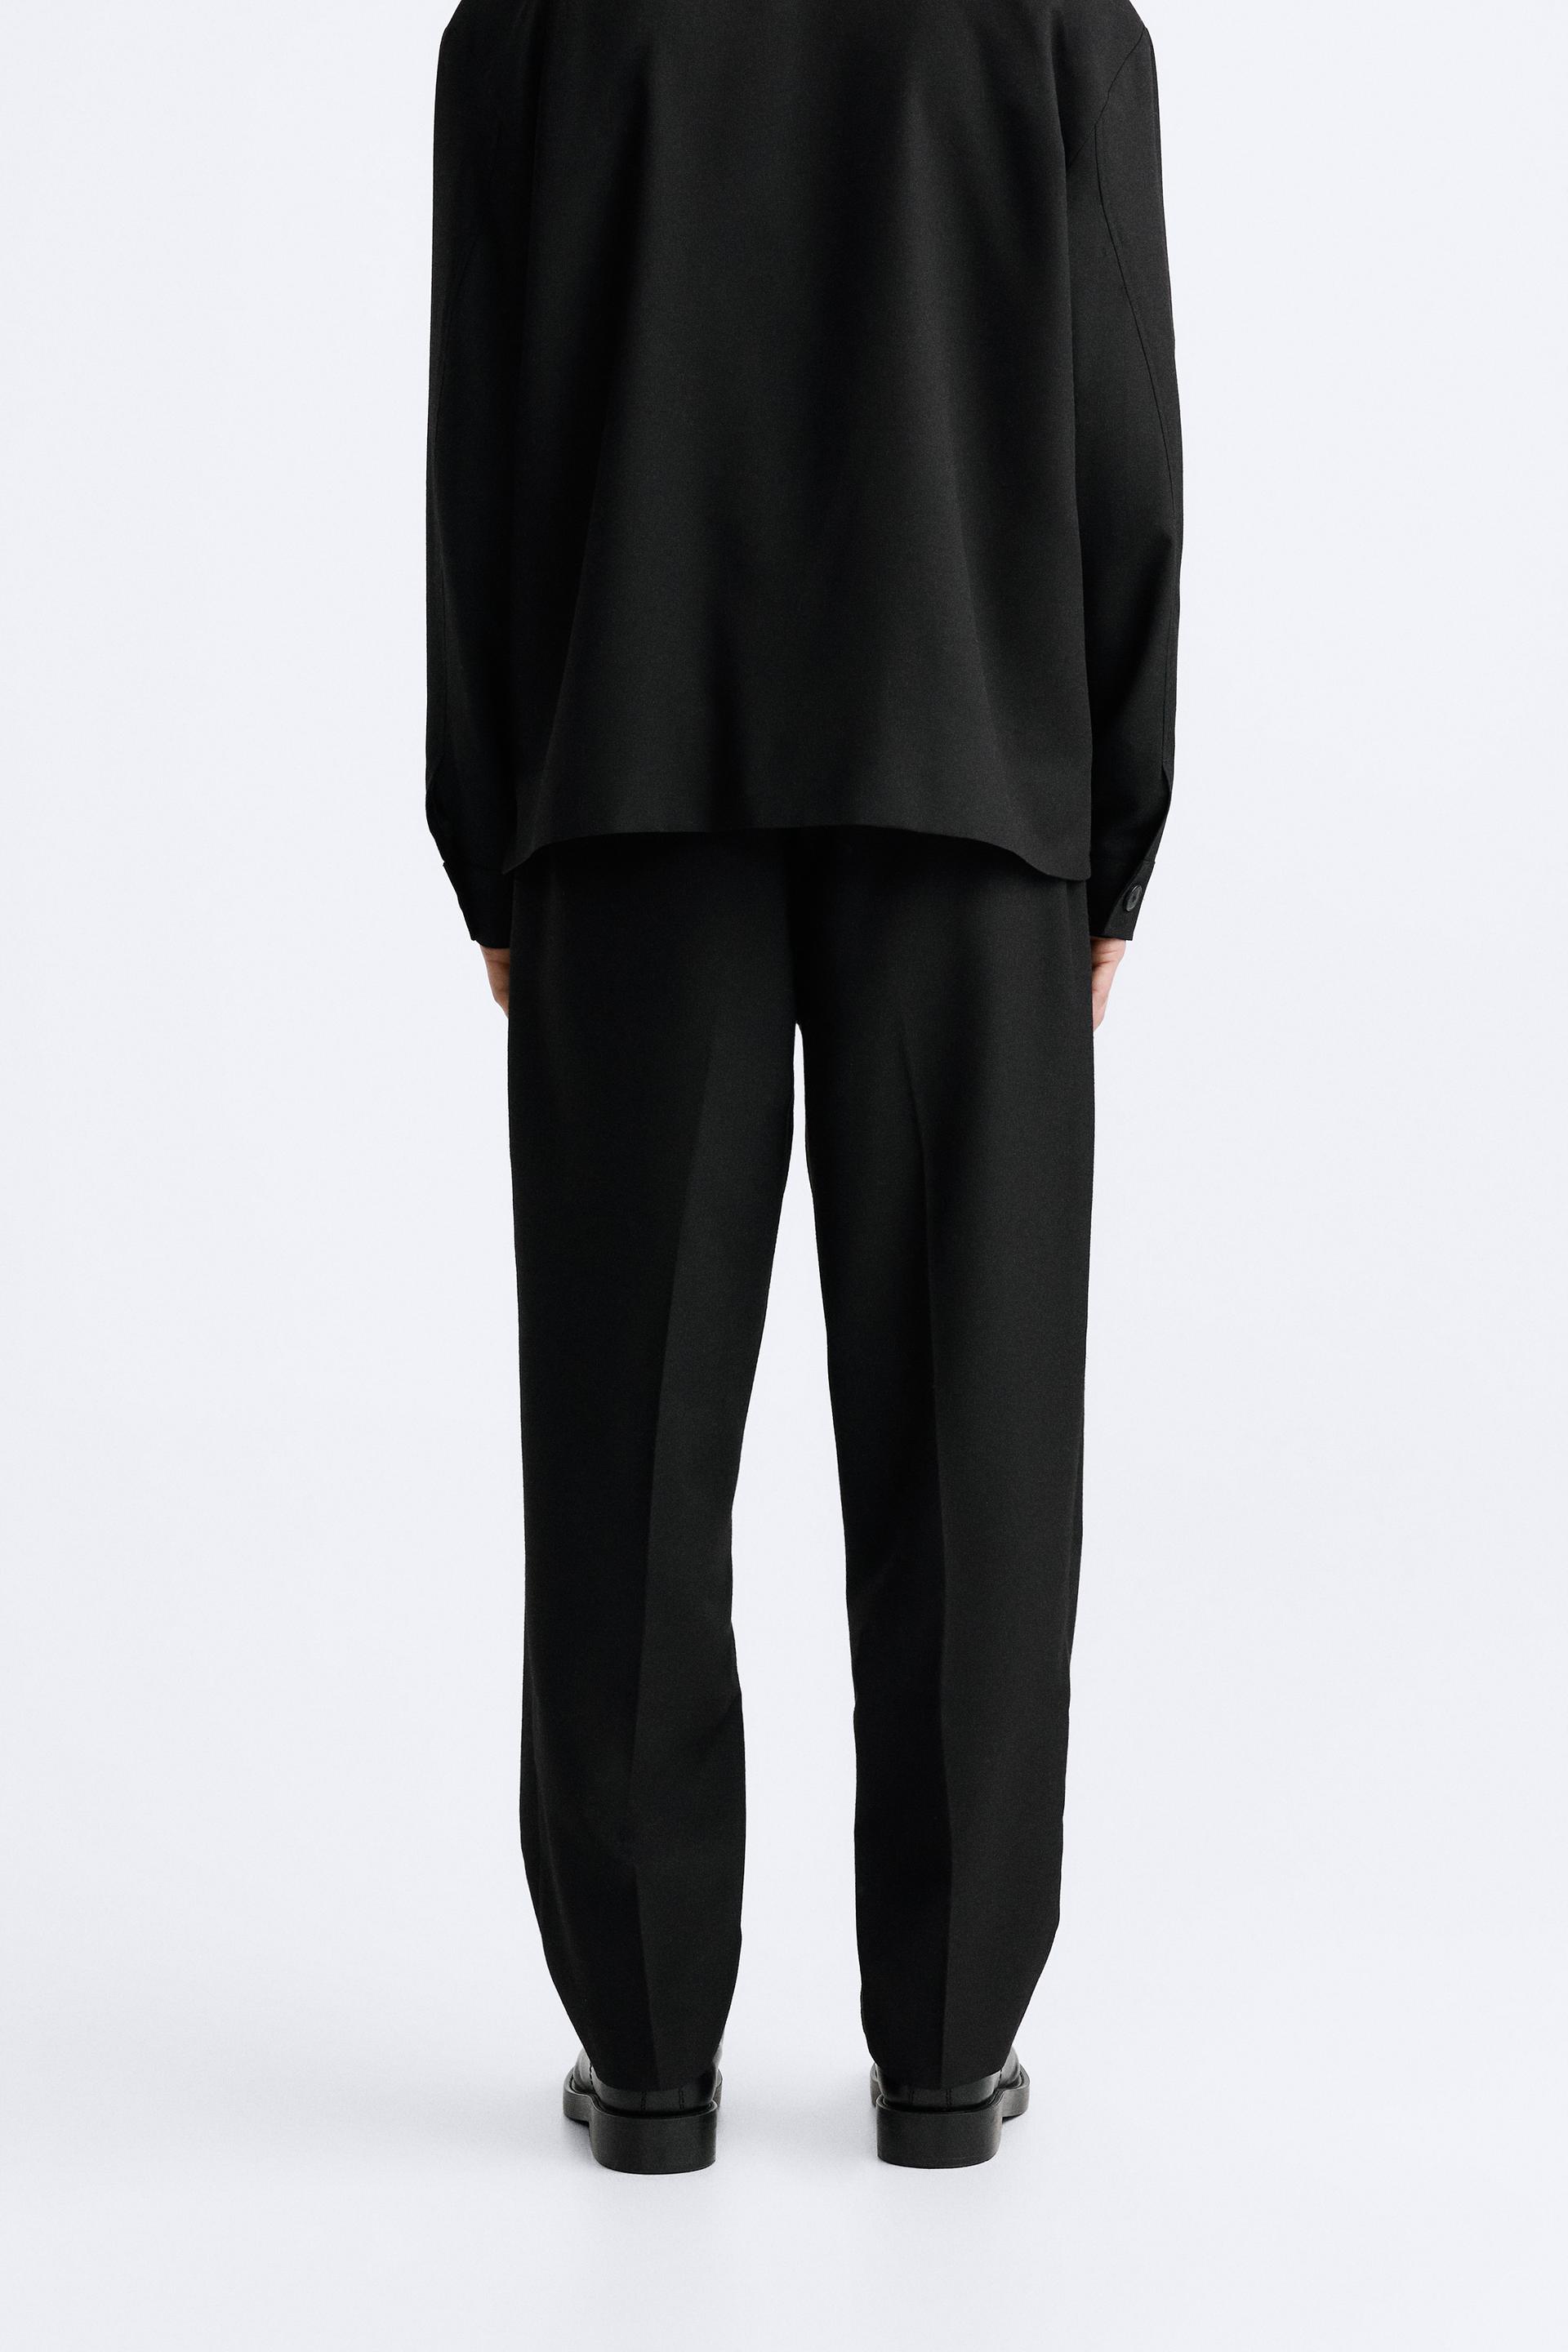 STRUCTURED TWILL PANTS - Black